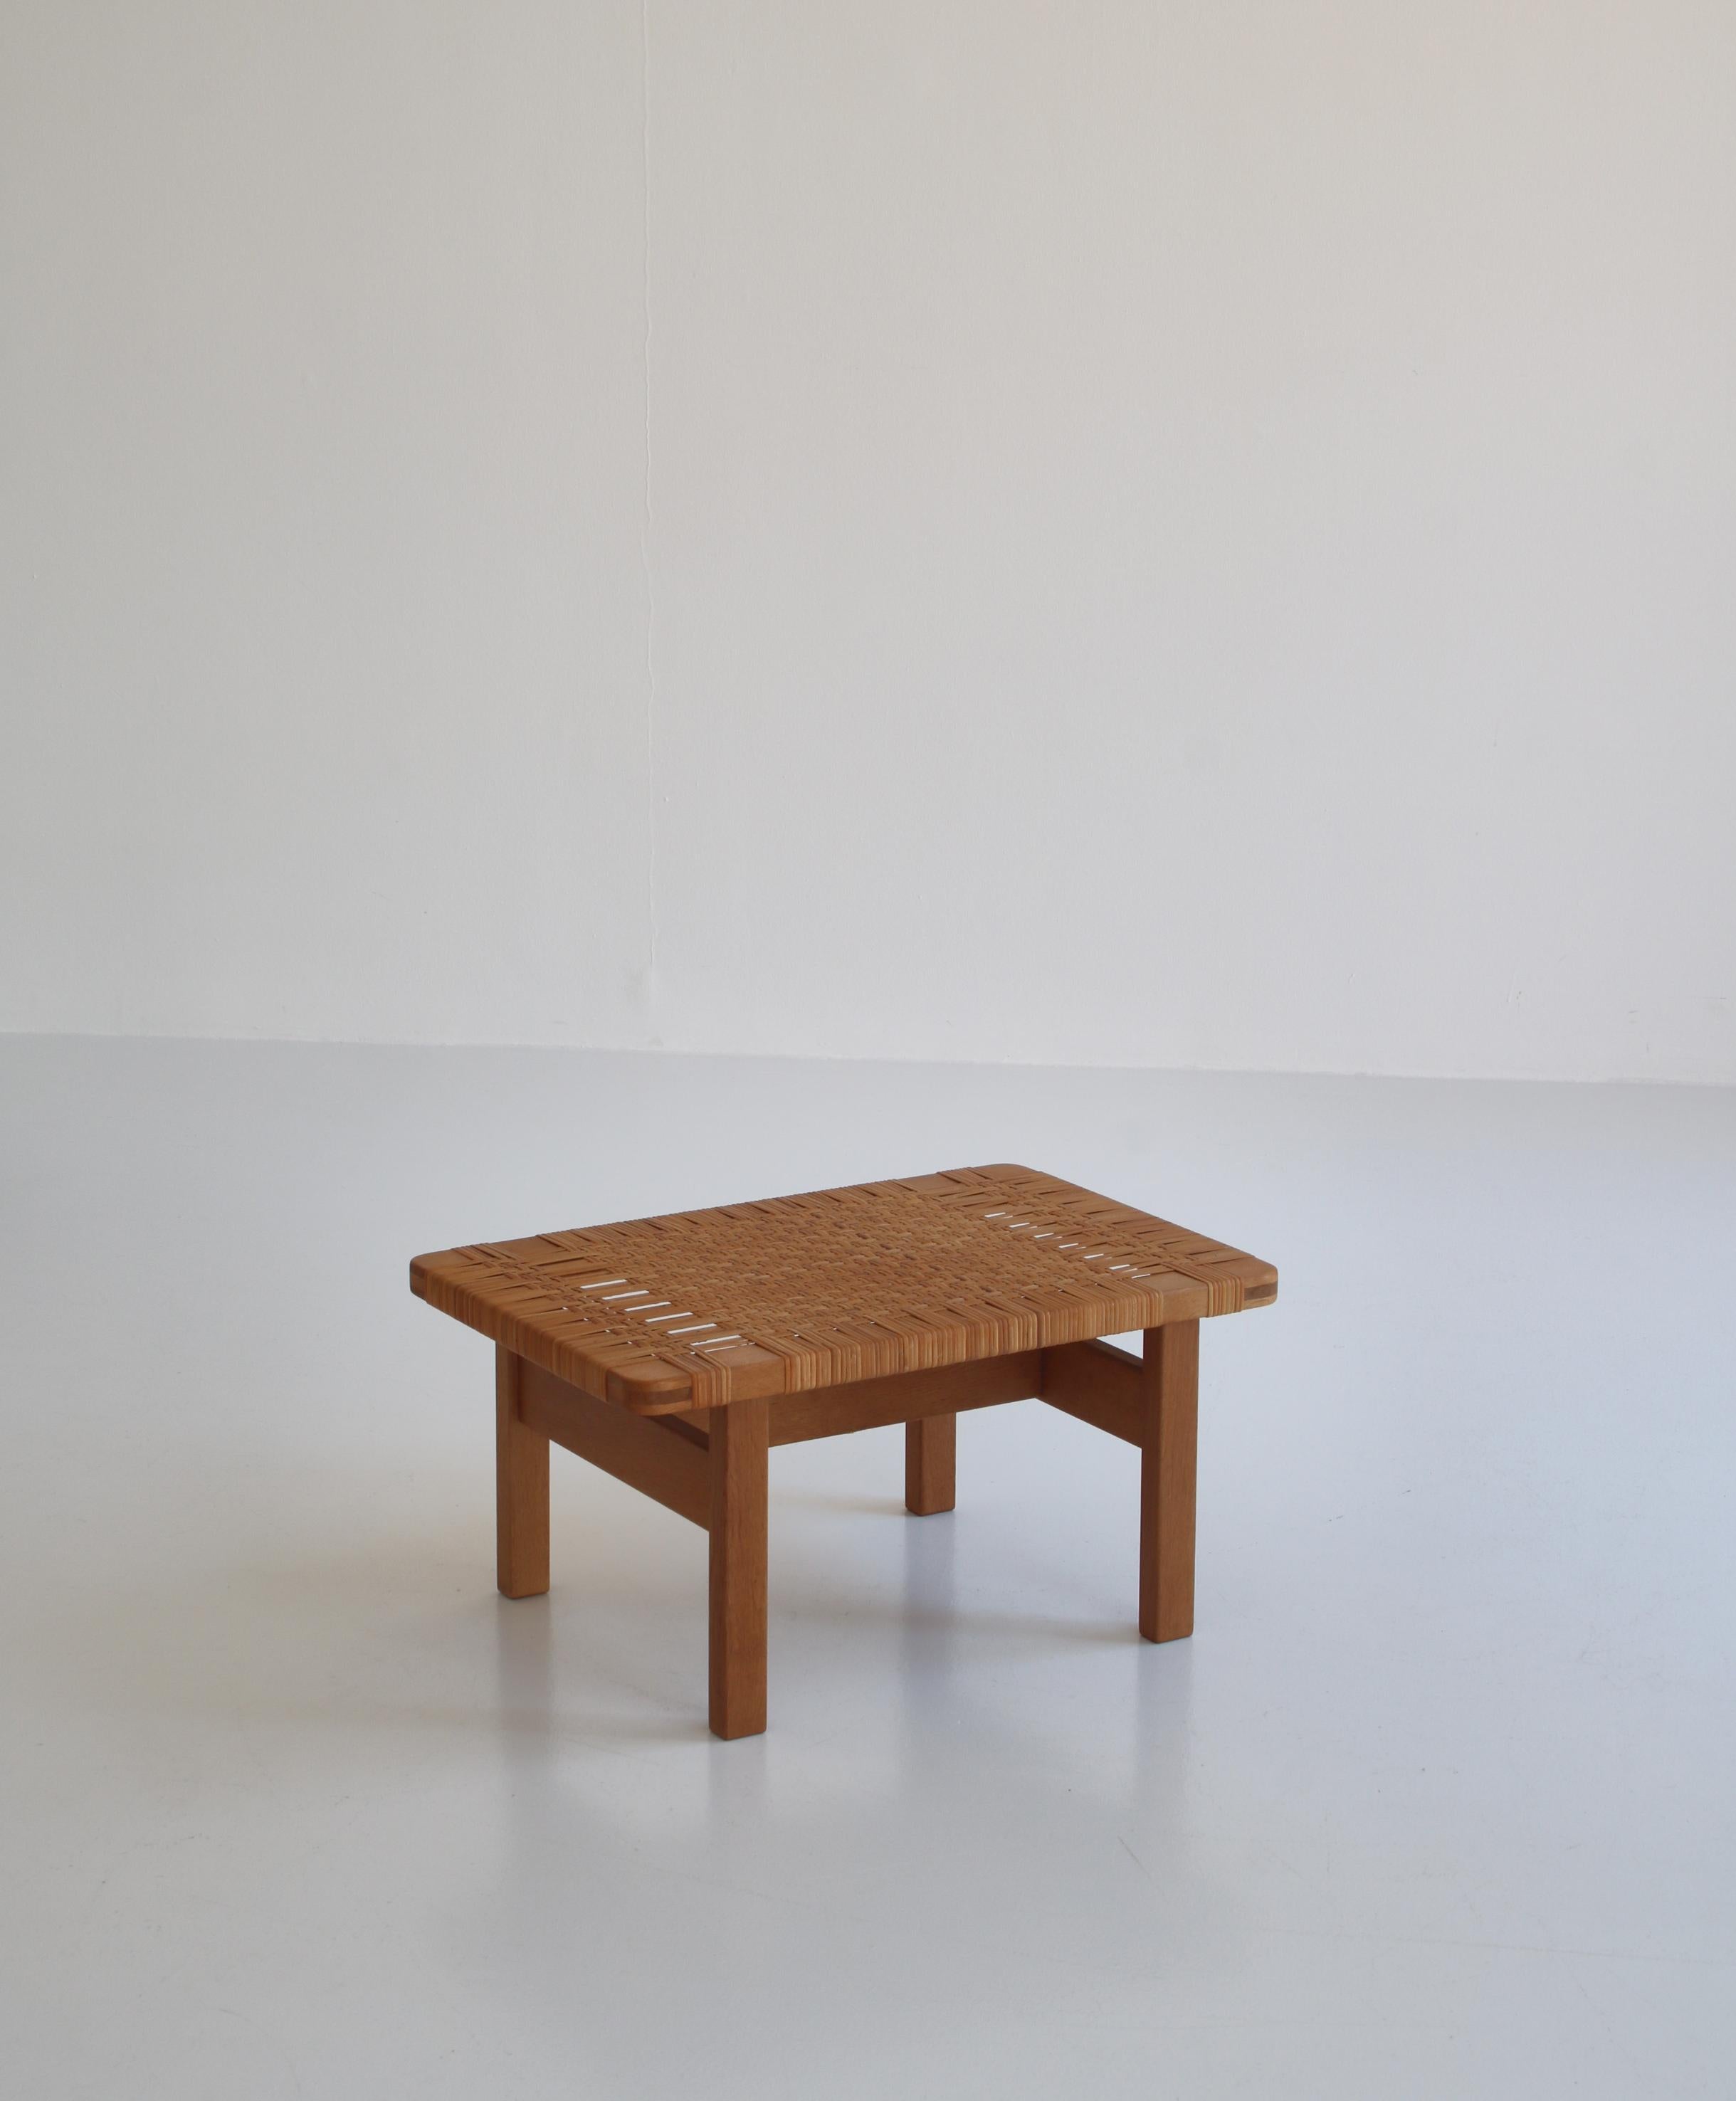 Borge Mogensen Side Table/Bench in Oak and Rattan Cane, 1950s, Denmark In Good Condition For Sale In Odense, DK